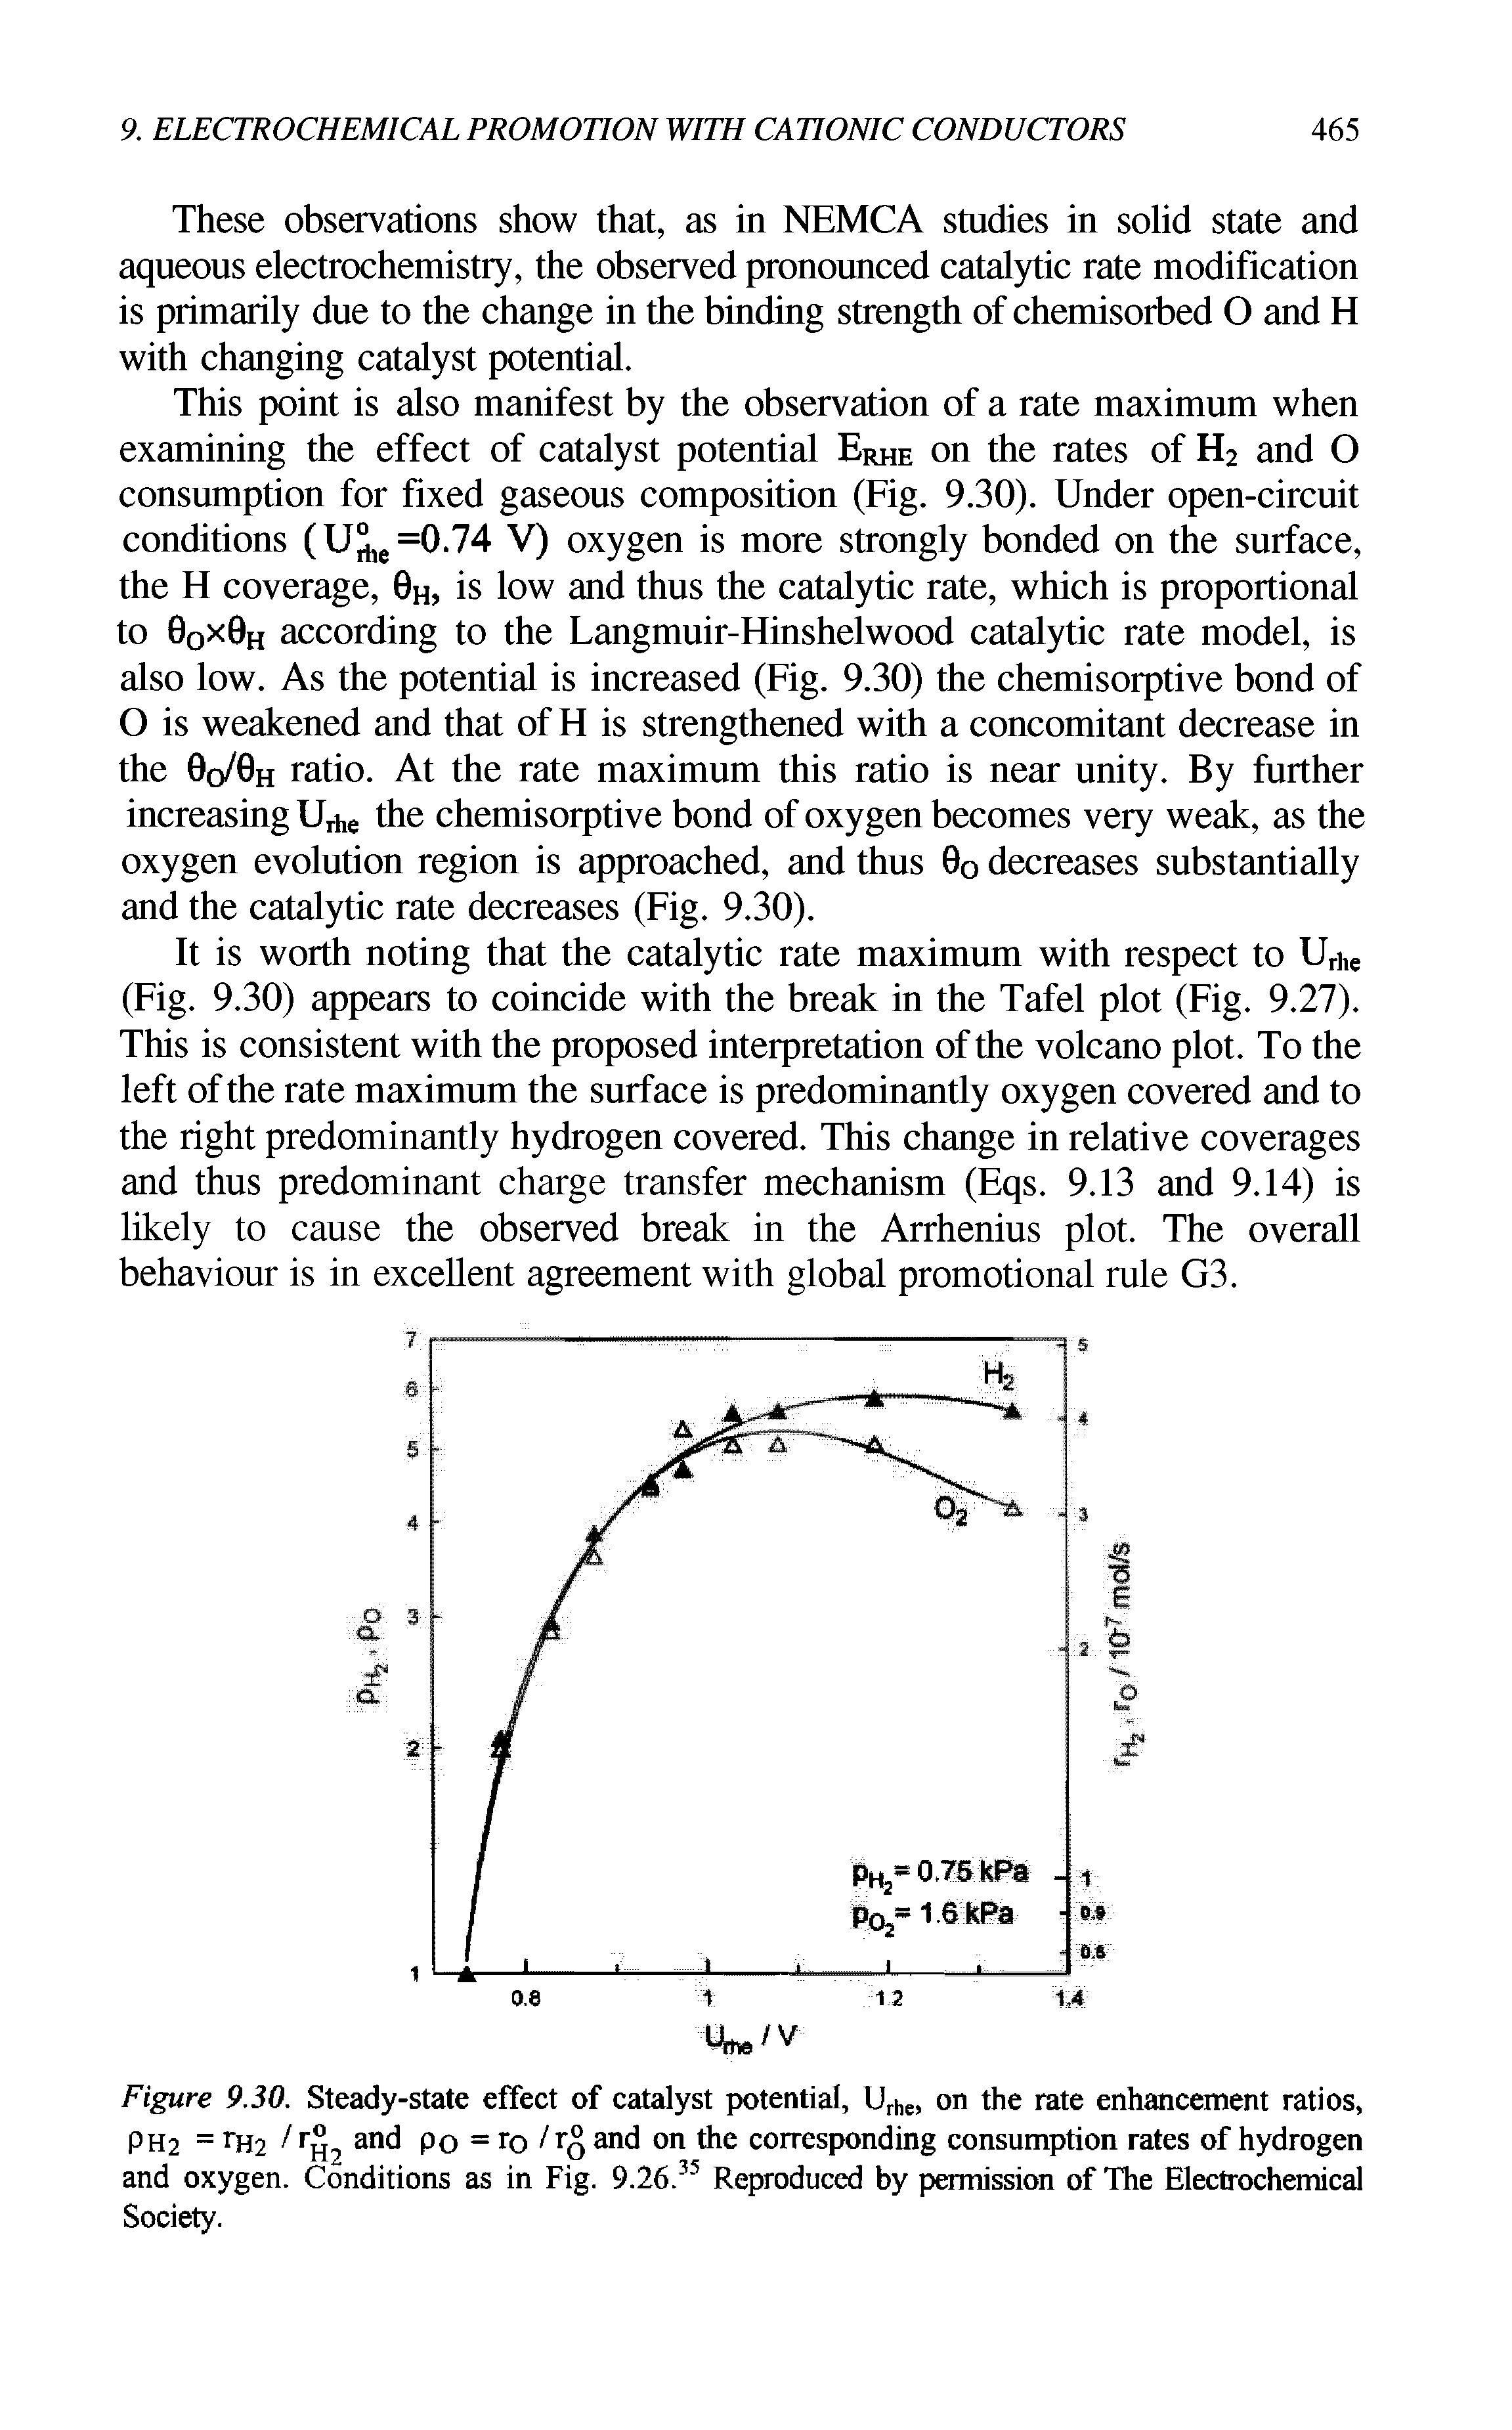 Figure 9.30. Steady-state effect of catalyst potential, Urhe, on the rate enhancement ratios, Ph2 = fH2 / r 2 and po = ro /Iq and on the corresponding consumption rates of hydrogen and oxygen. Conditions as in Fig. 9.26.35 Reproduced by permission of The Electrochemical Society.